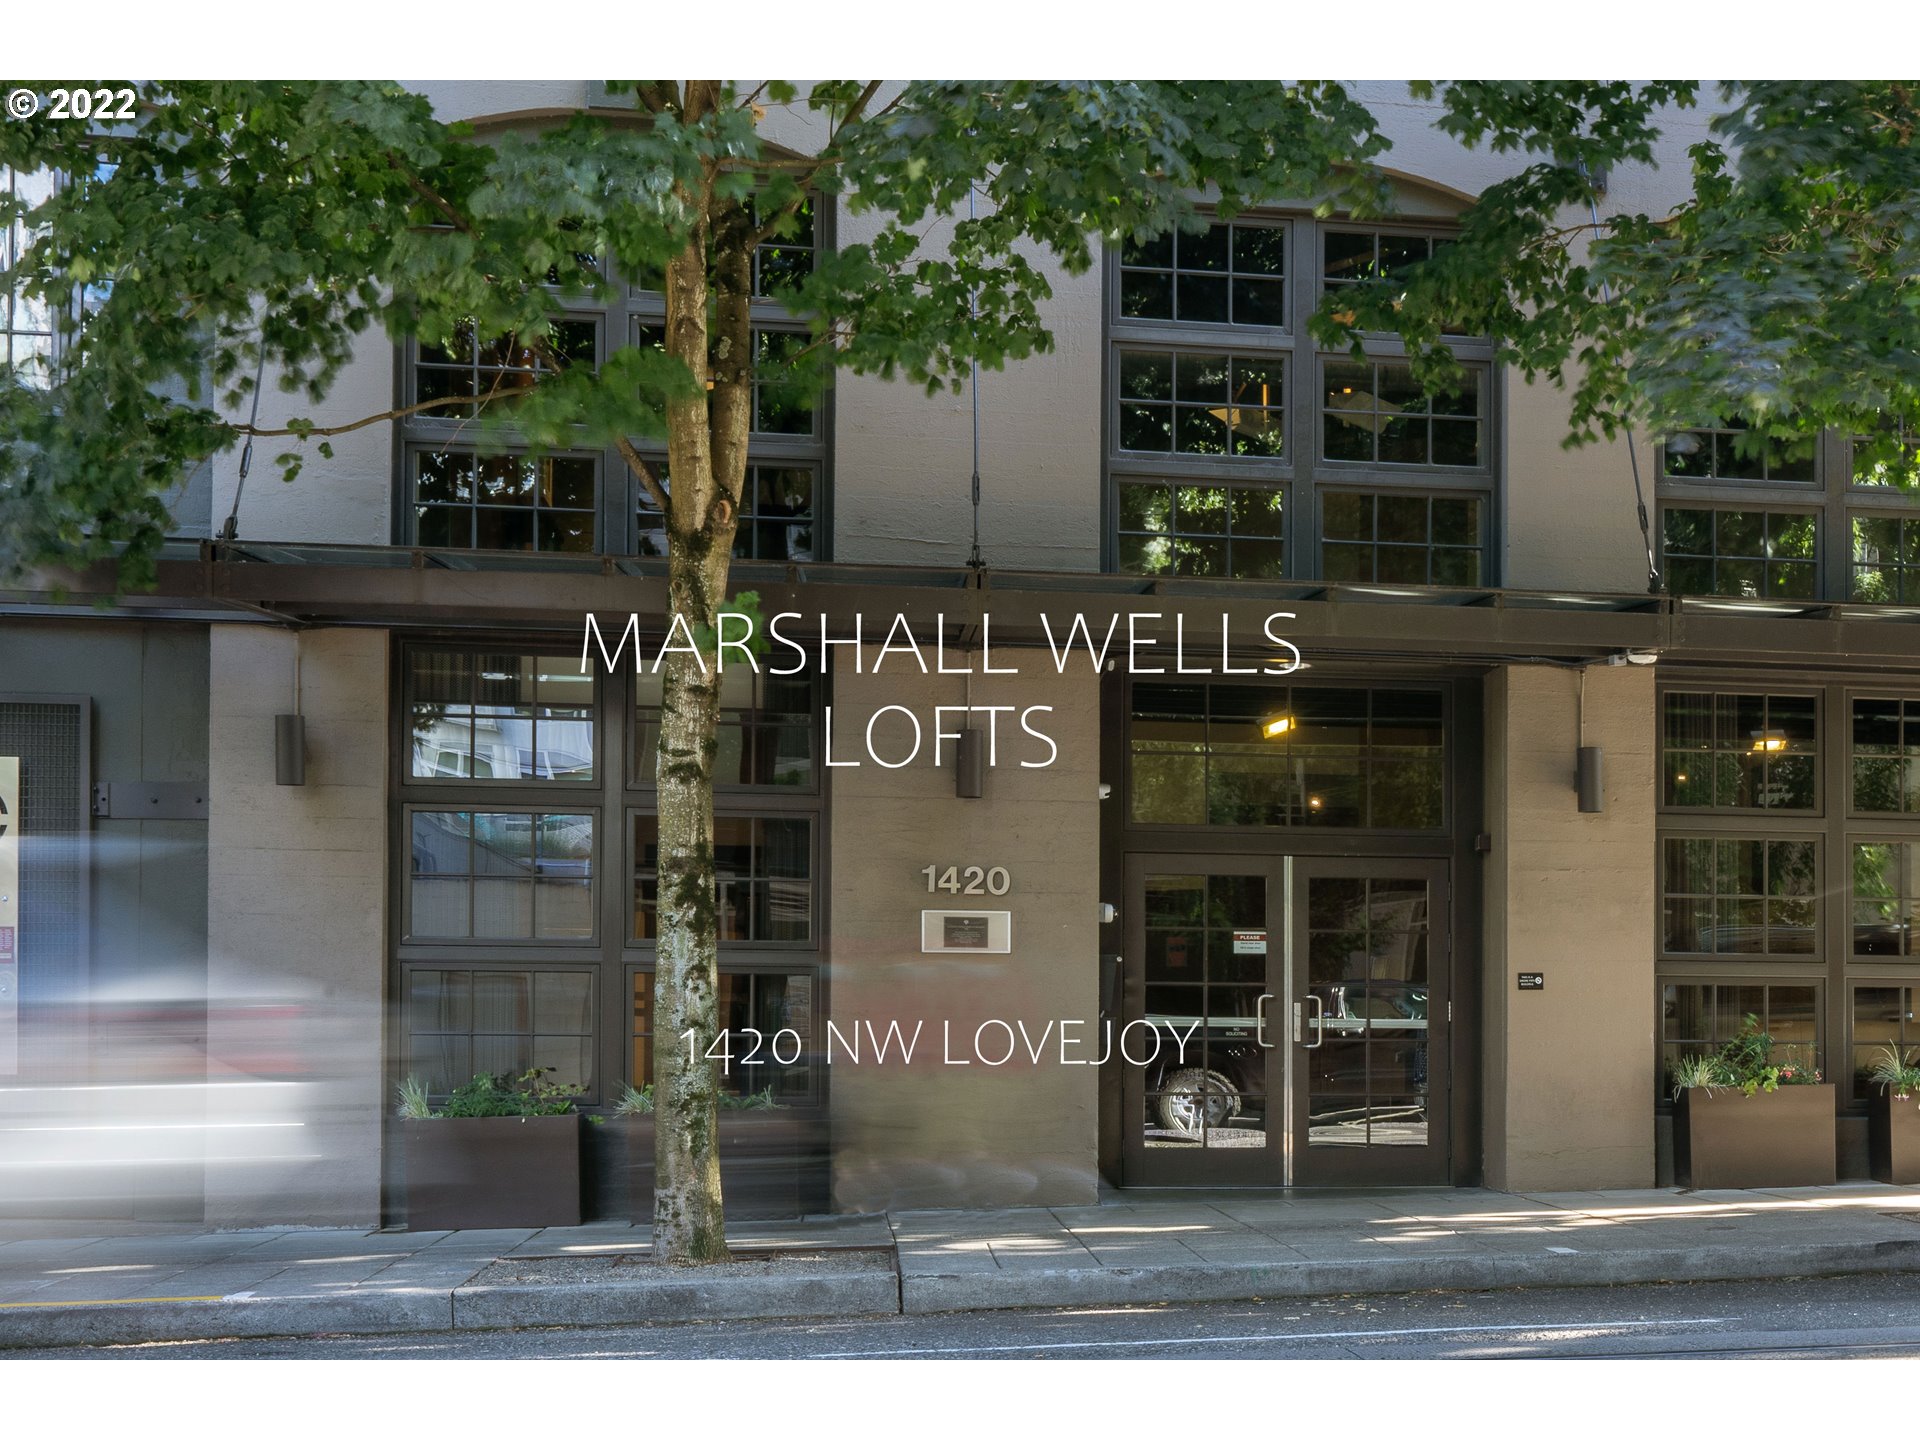 You might also be interested in MARSHALL WELLS LOFTS